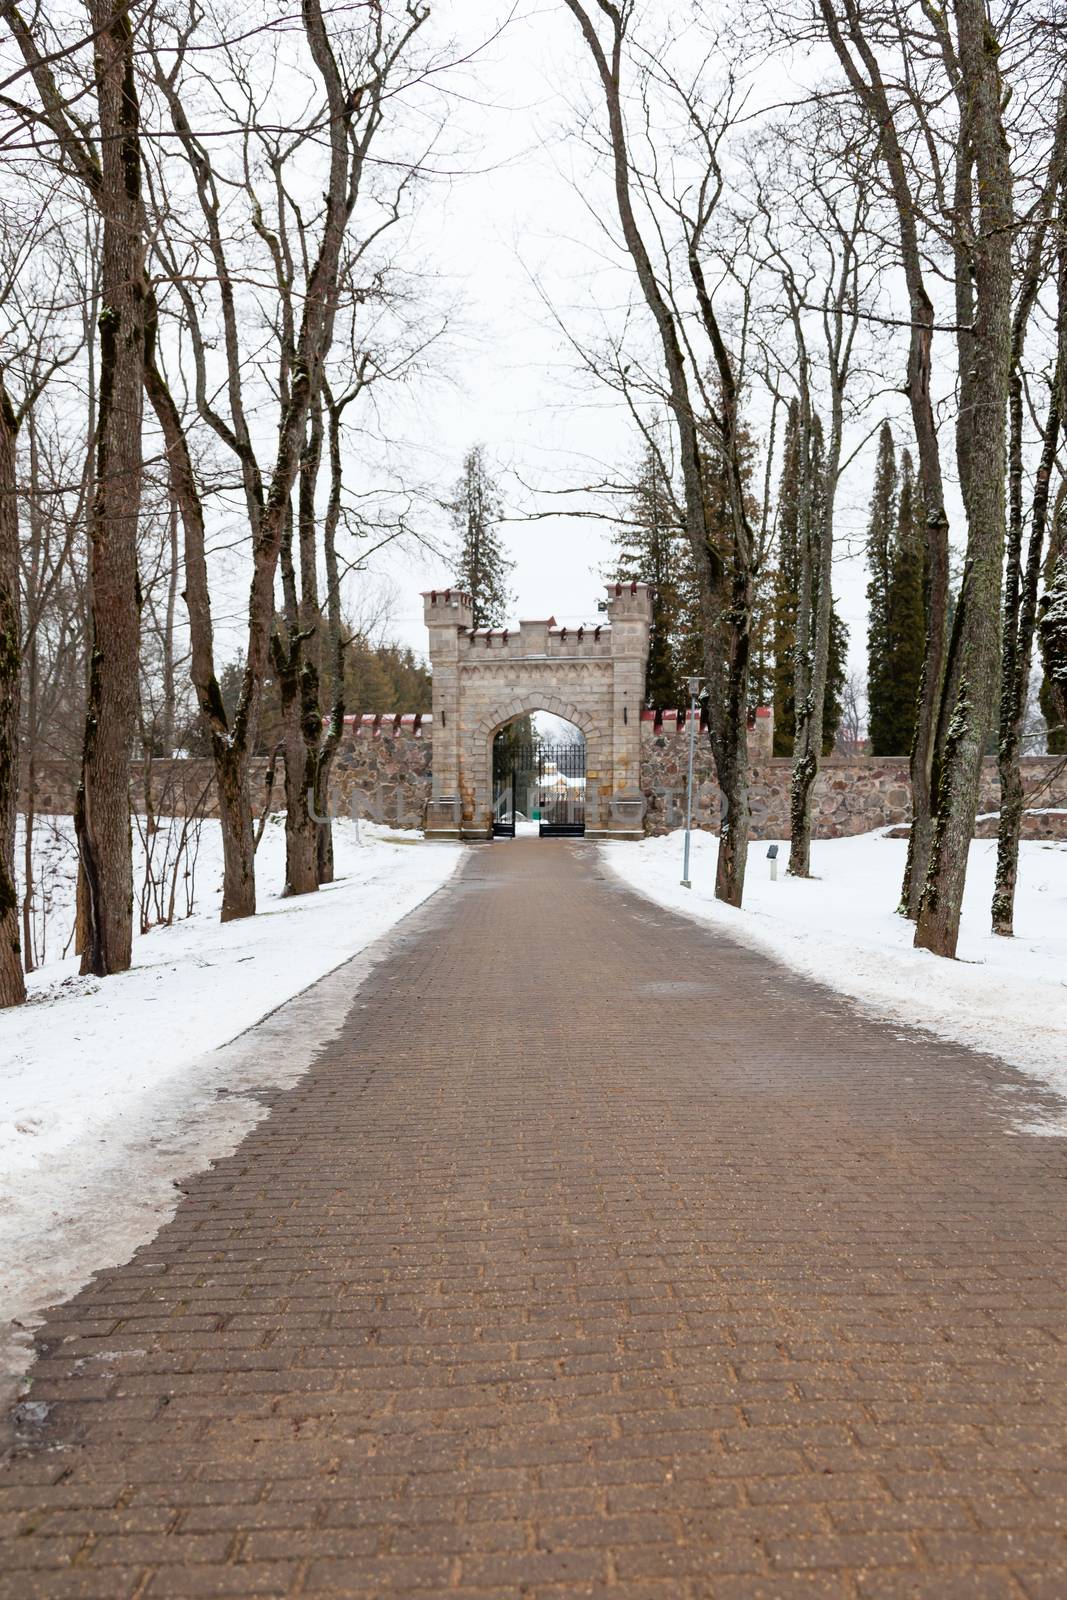 Sigulda is a town in Latvia and the New Castle was built in 1878.